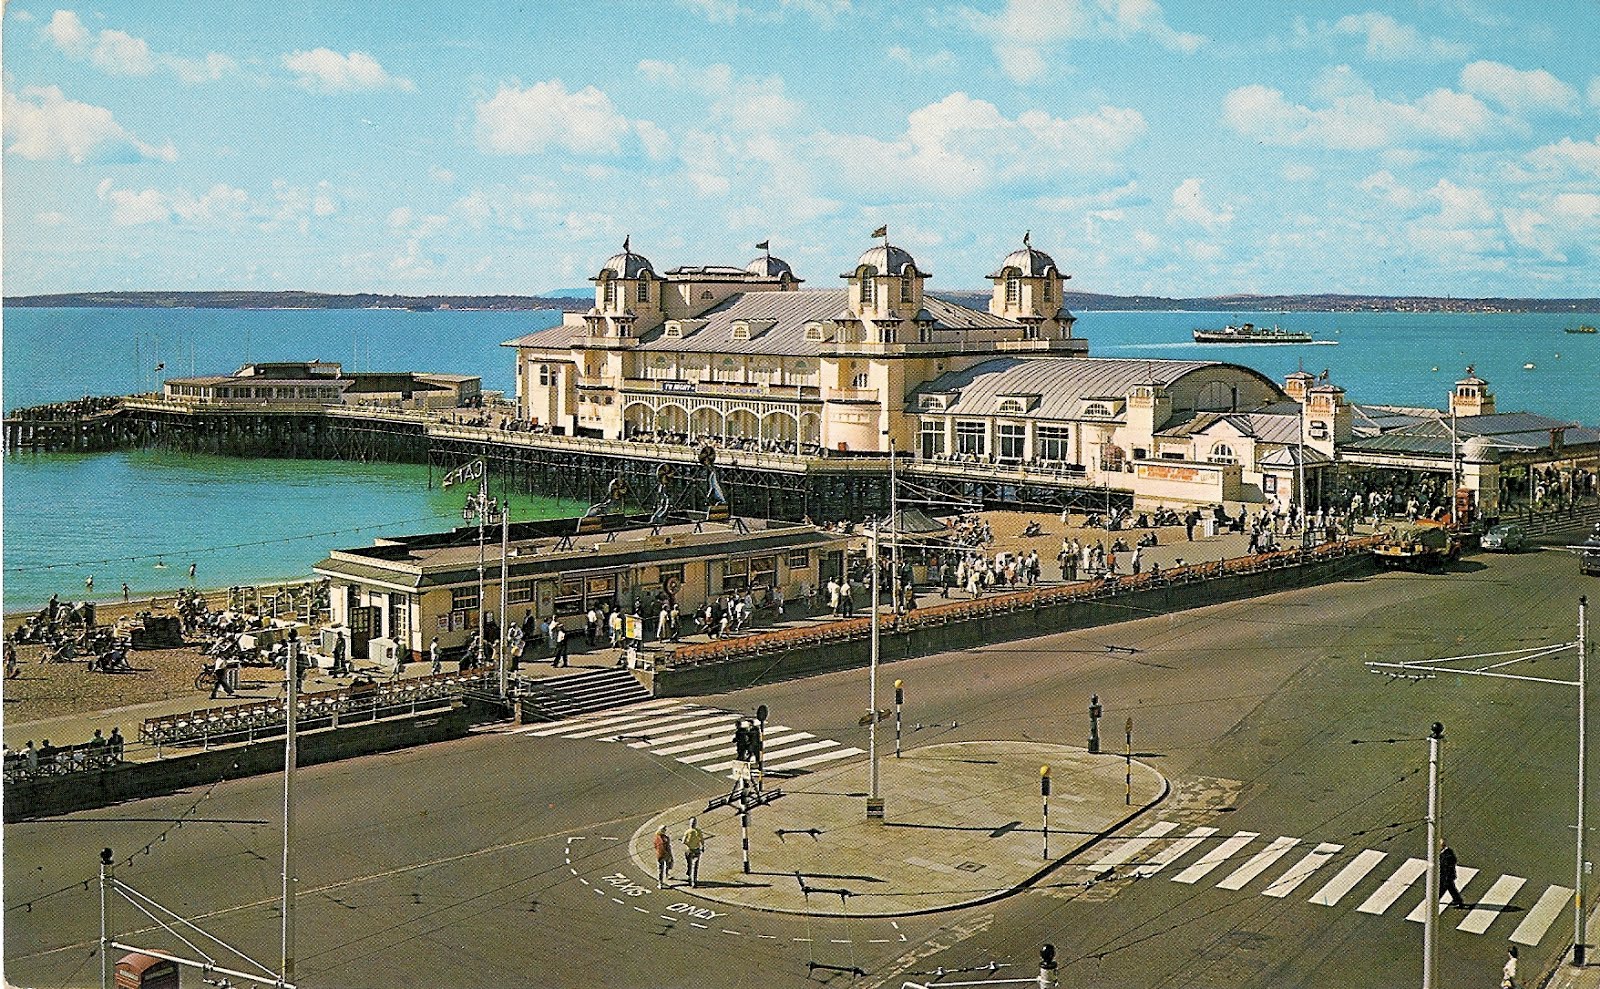 South Parade Pier in the 1950s